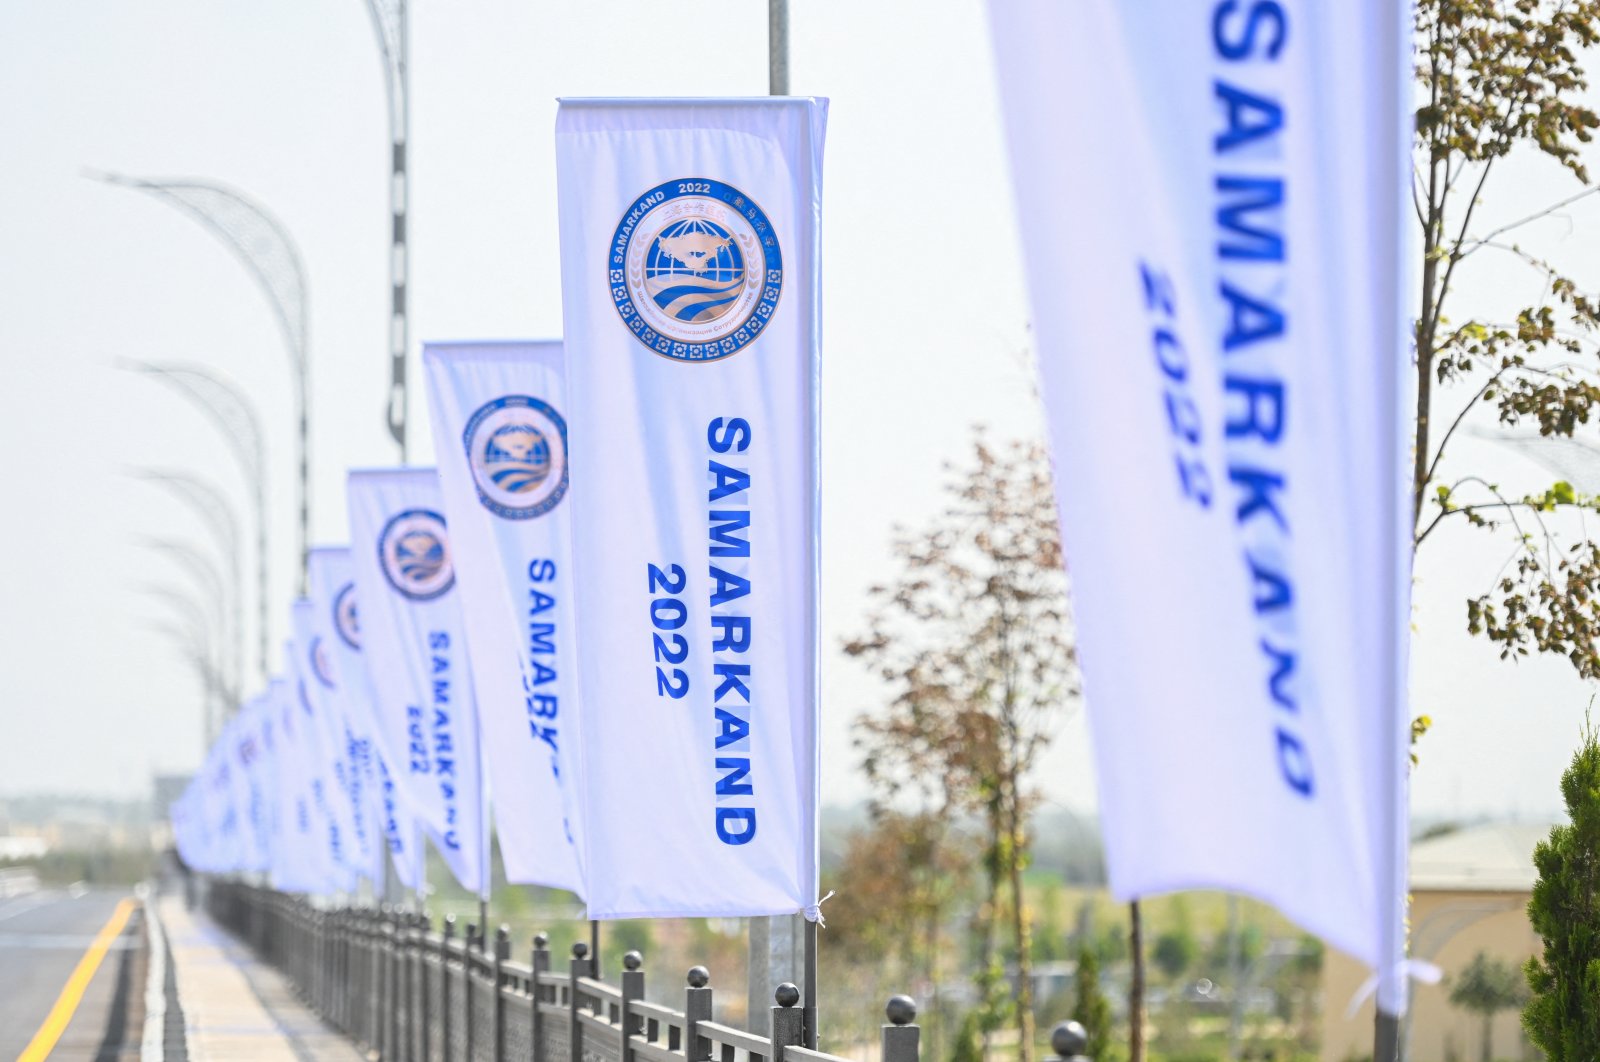 Flags fly by the road ahead of the Shanghai Cooperation Organization (SCO) summit in Samarkand, Uzbekistan, Sept. 10, 2022. (Reuters Photo)